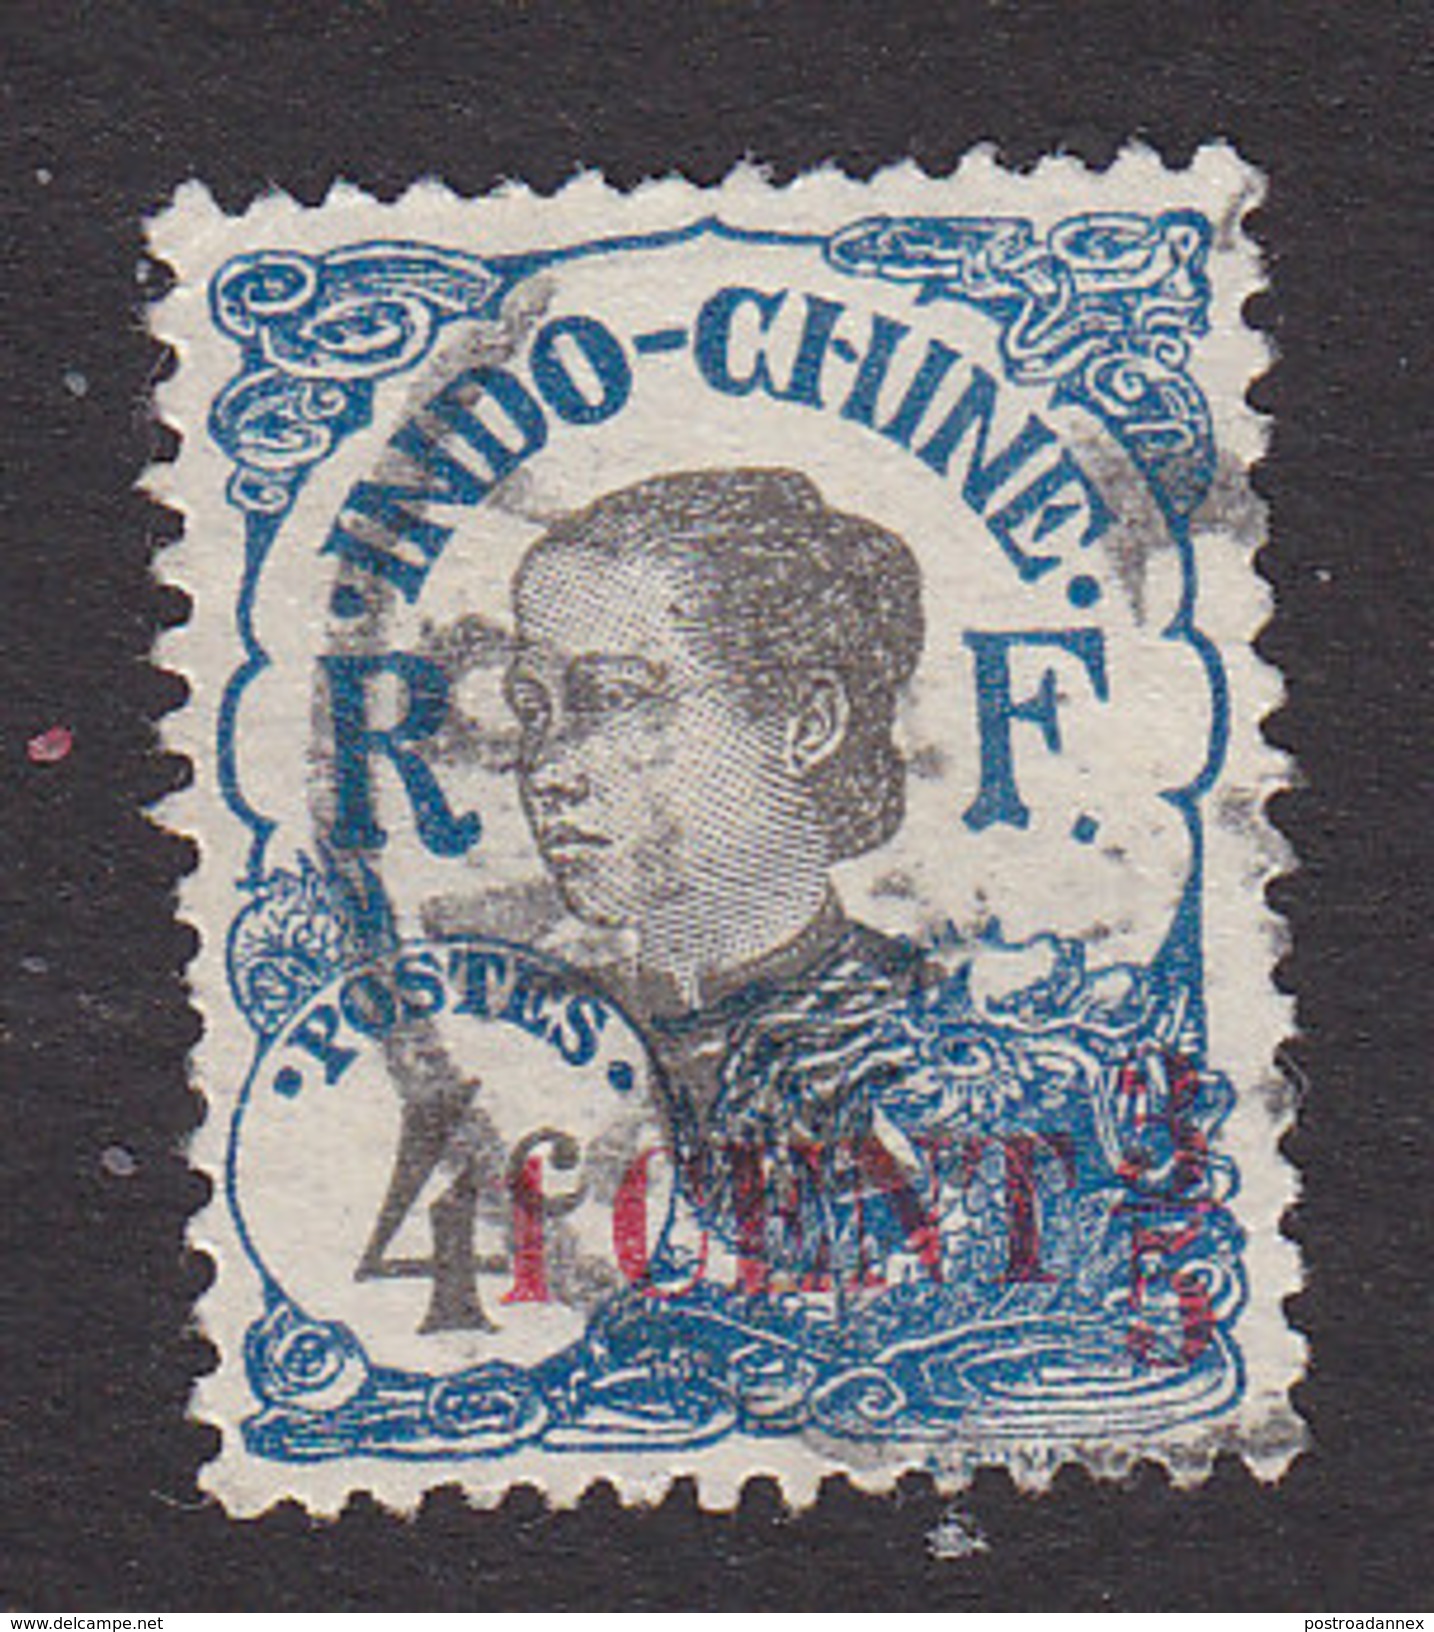 Indo-China, Scott #67, Used, Woman Of Indo-China Surcharged, Issued 1919 - Used Stamps